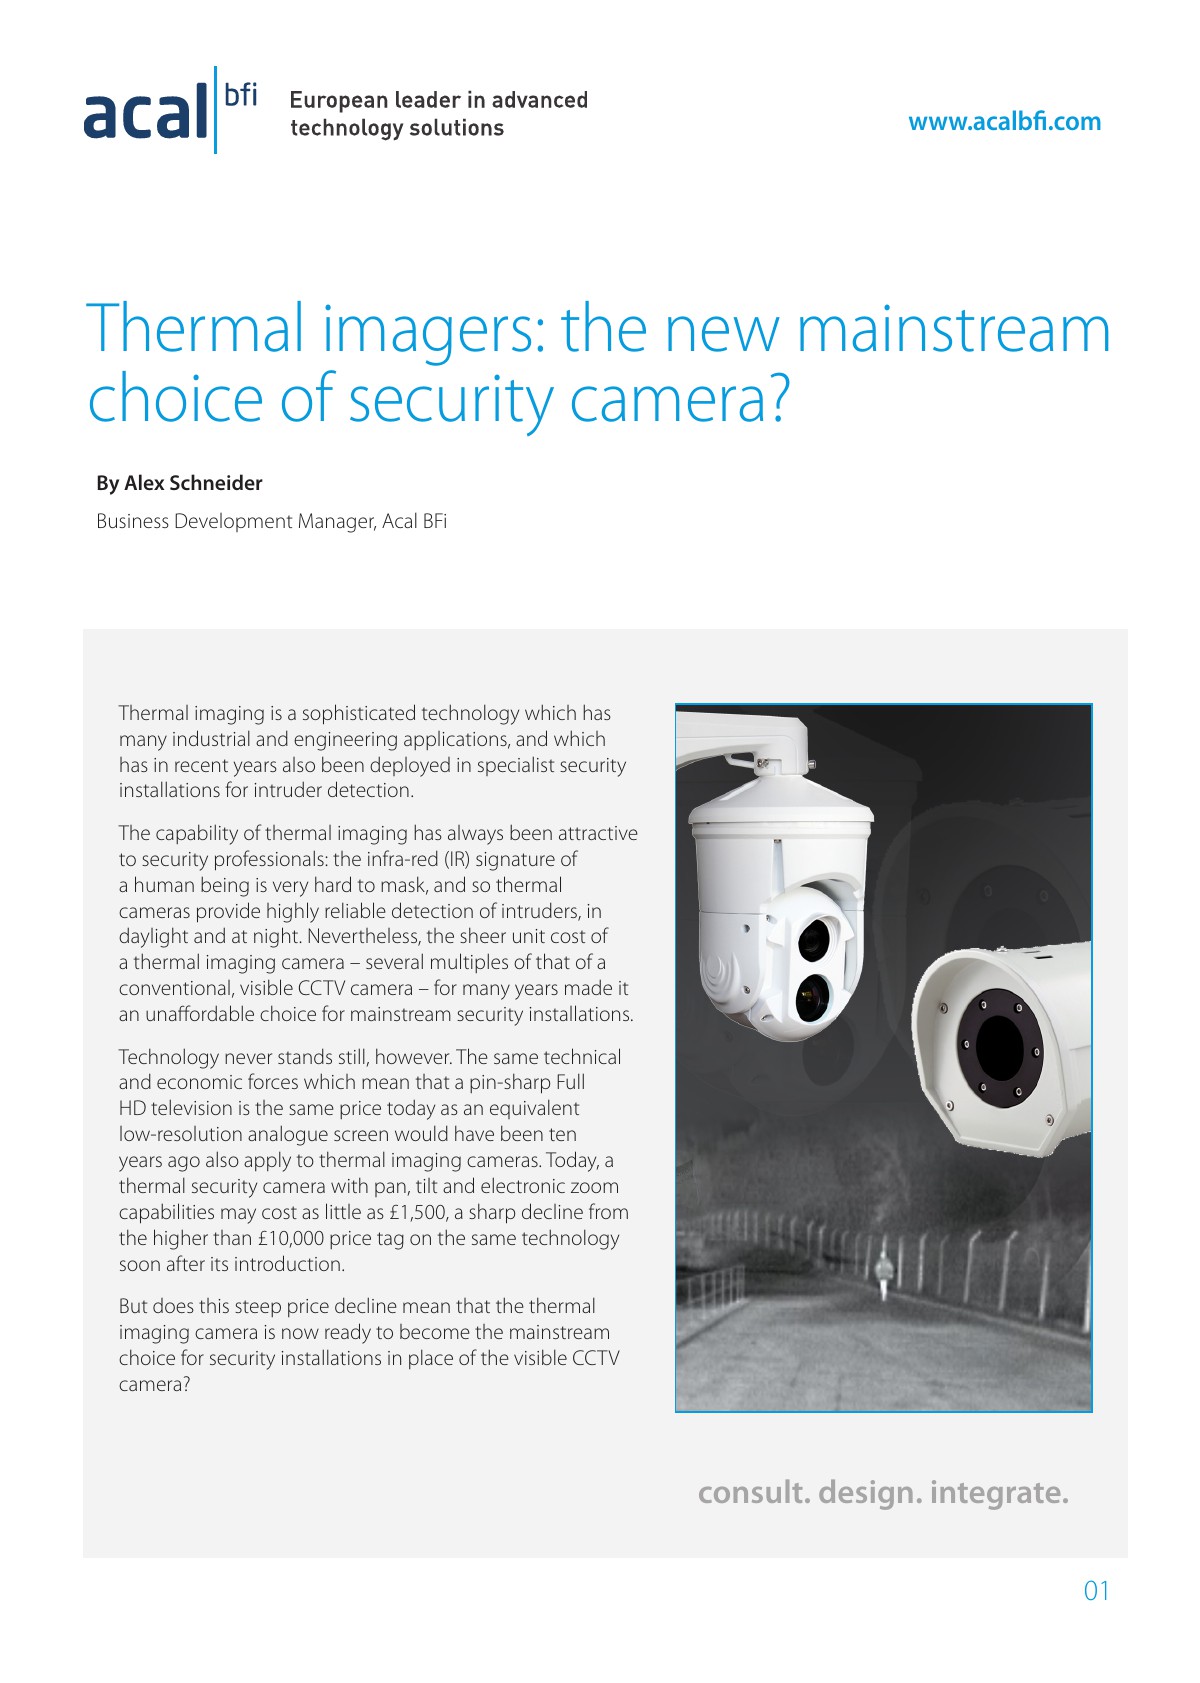 Thermal imagers: the new mainstream choice of security cameras?